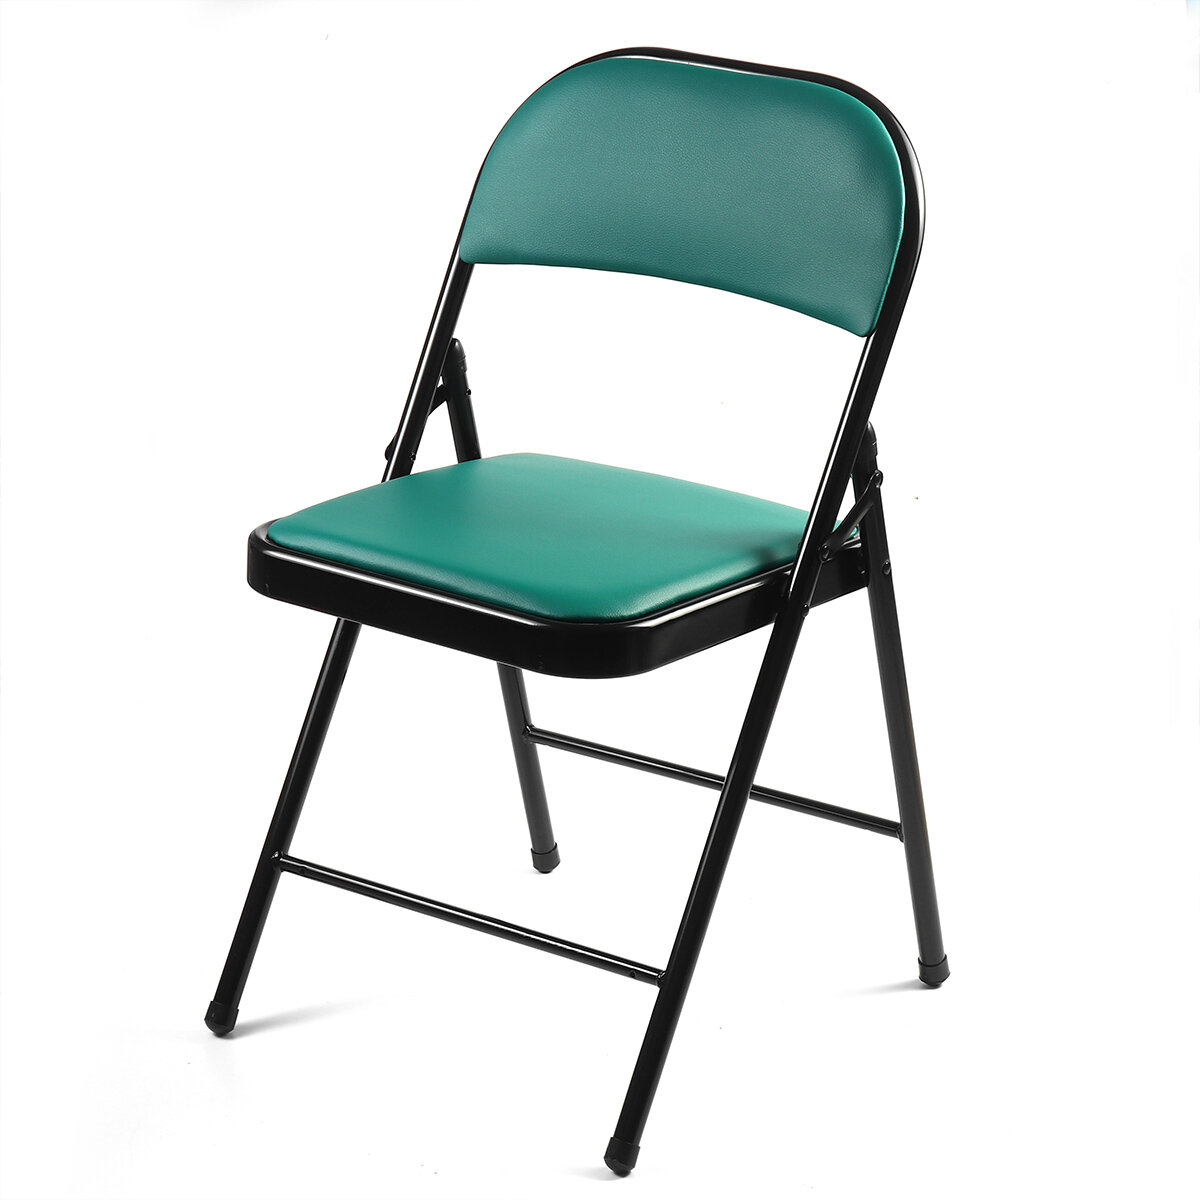 Folding Backrest Chair Dark Green Portable Simple Office Computer Chair Modern Conference Stool Home Office Dormitory Fu